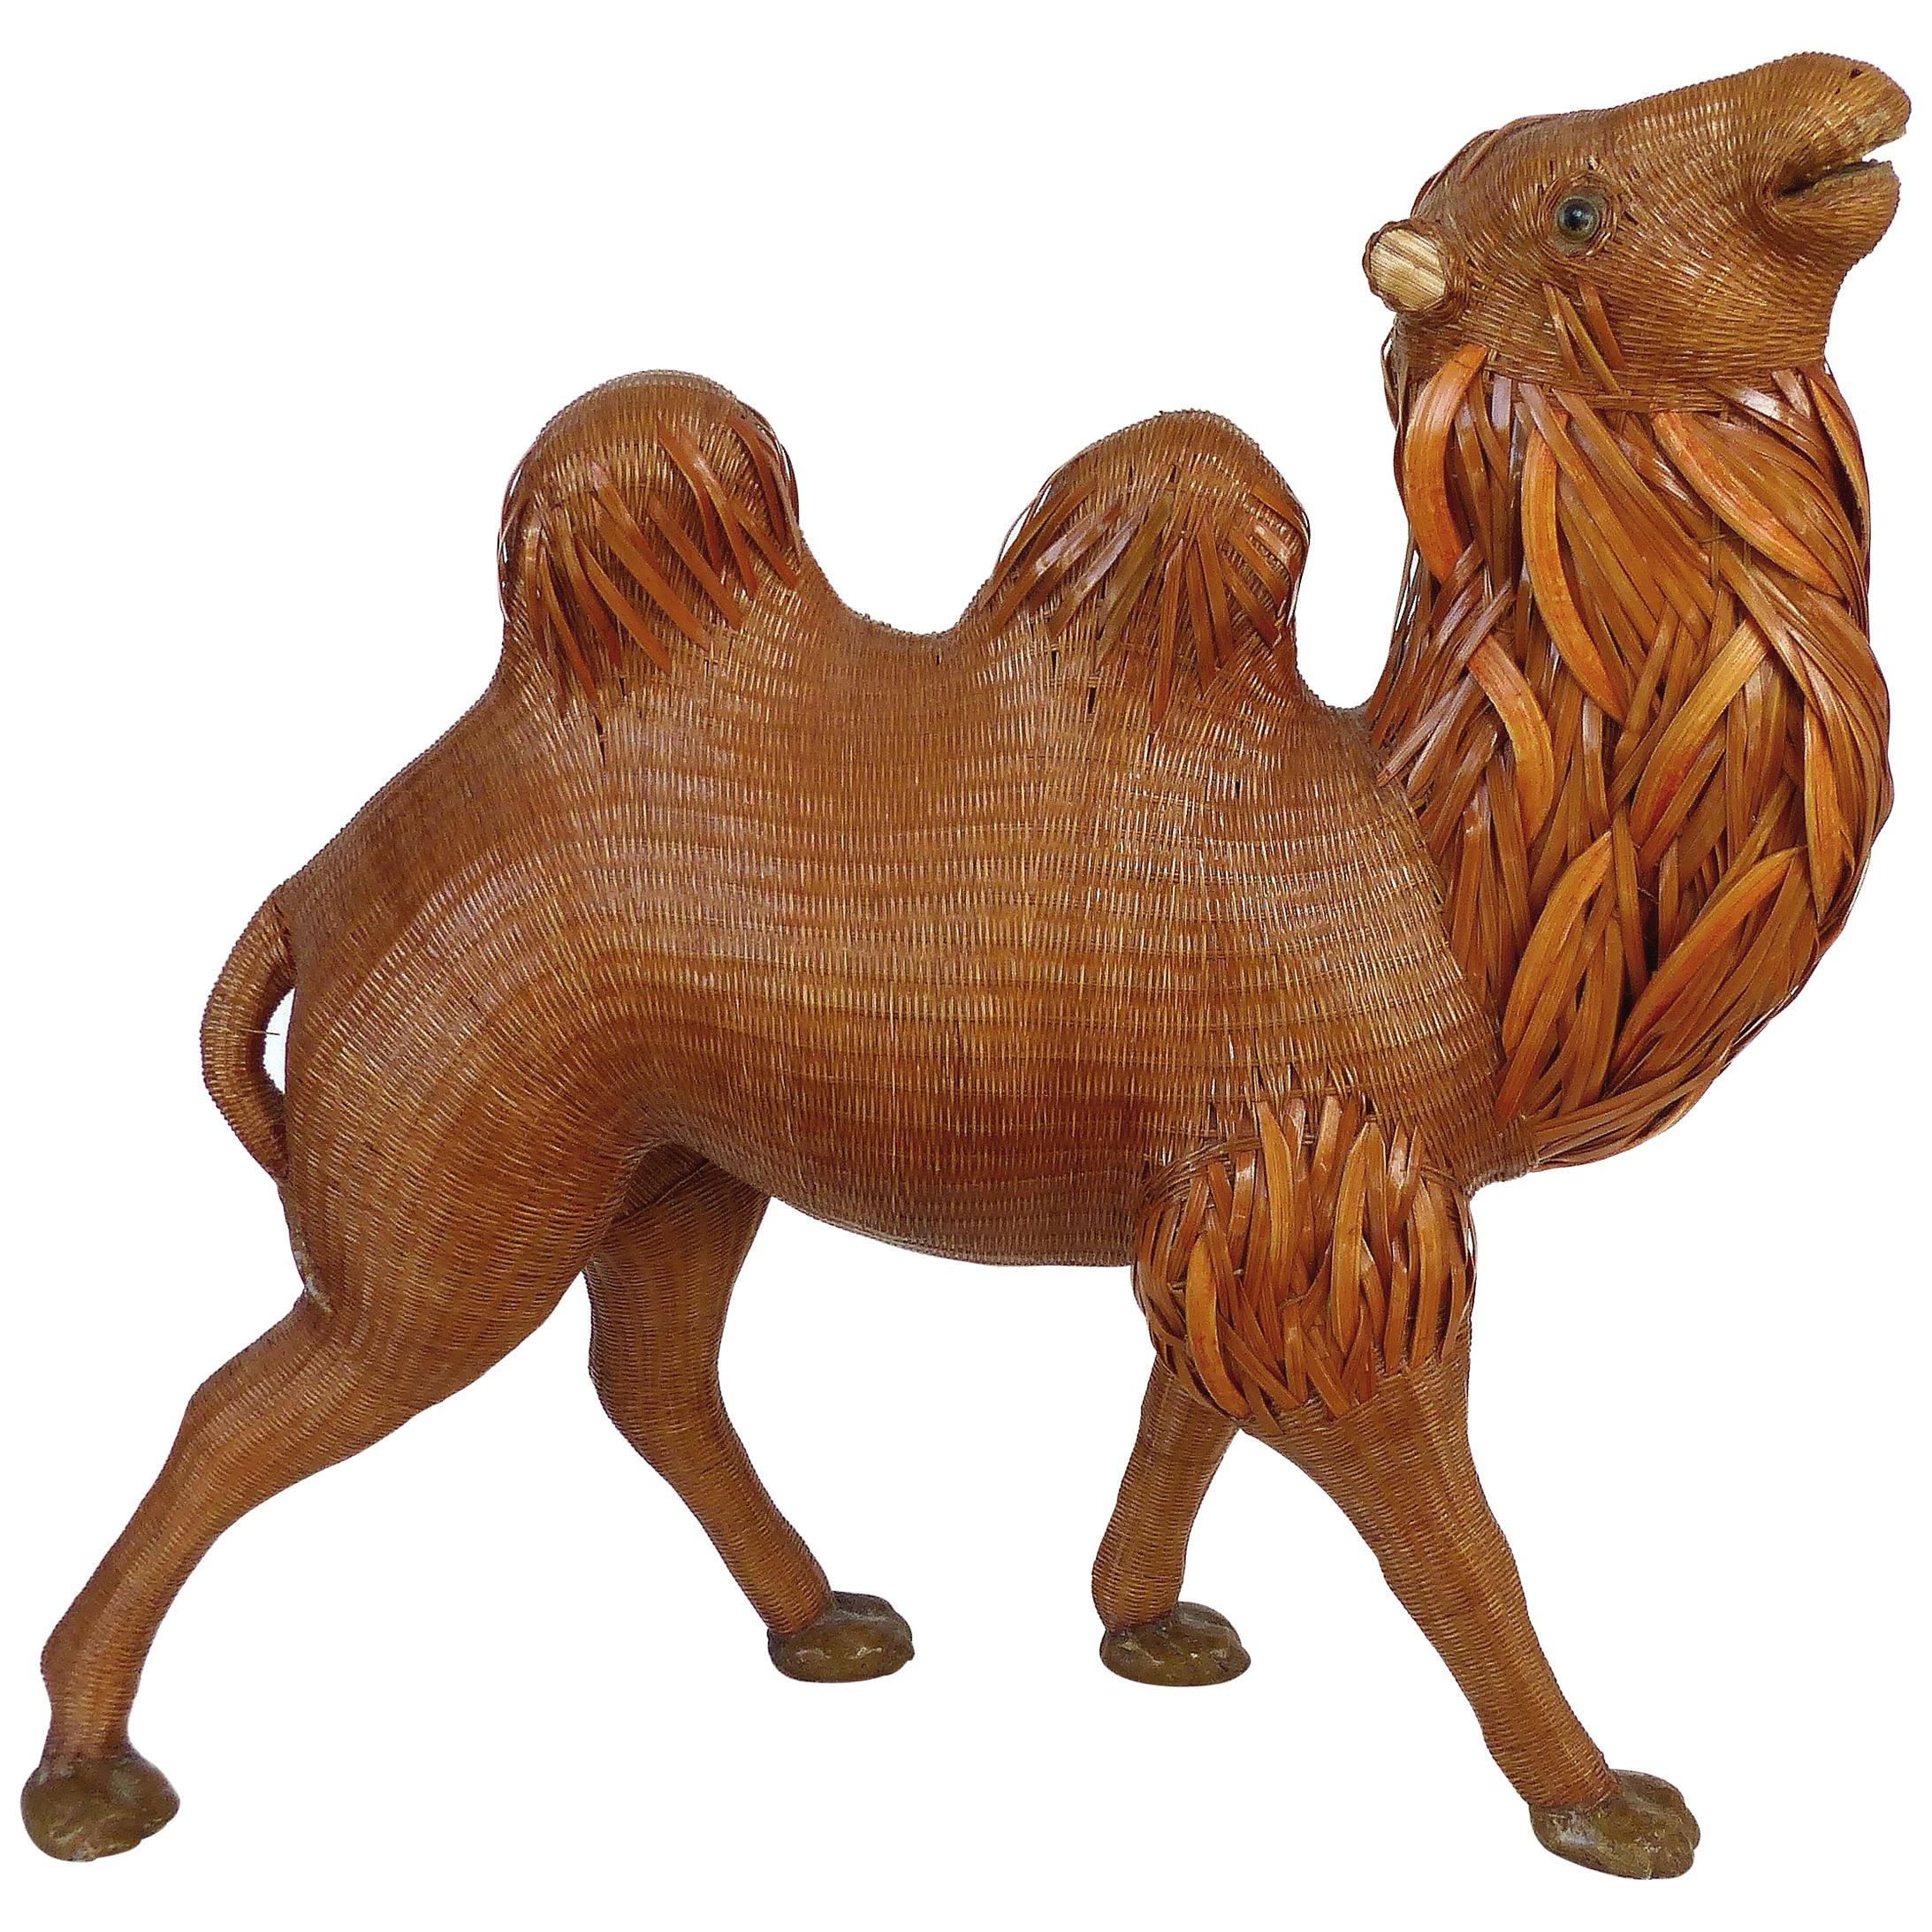 Chinese Woven Reed Sculpture of a Camel from the Shanghai Collection